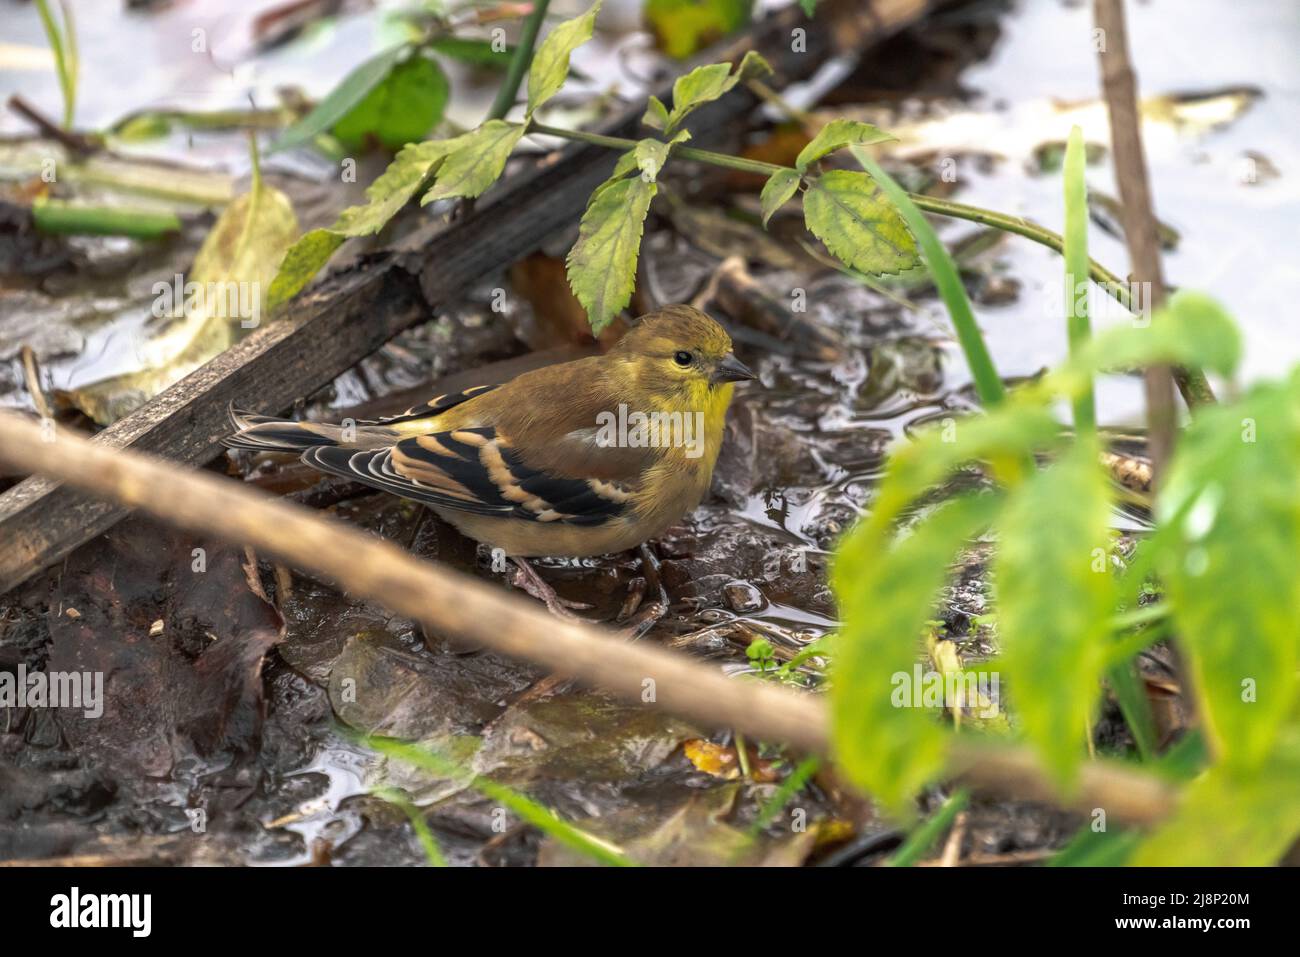 A closeup bird wildlife photo of a non-breeding male American goldfinch sitting in a small pool of water in a forest in autumn in the Midwest. Stock Photo